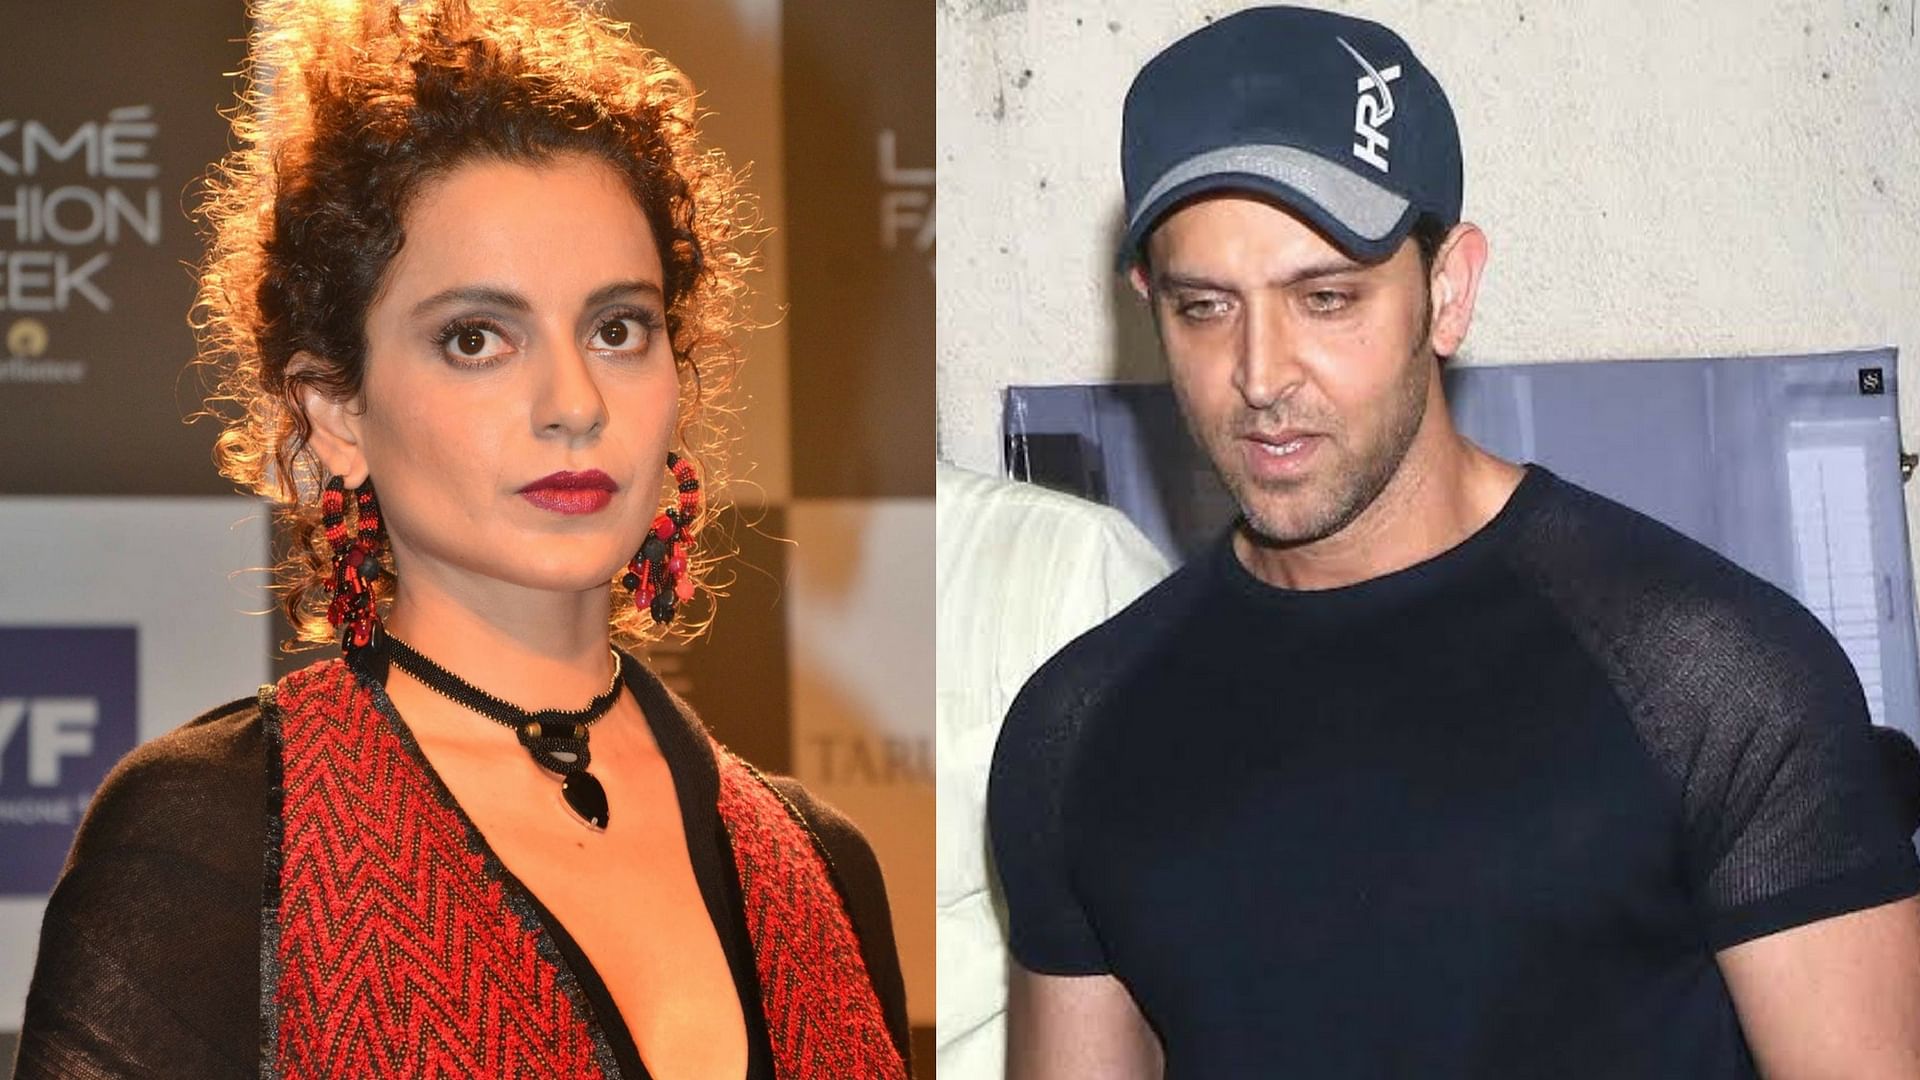 Kangana Ranaut’s sister has made a series of tweets with her permission about the <i>Mental Hai Kya </i>controversy.